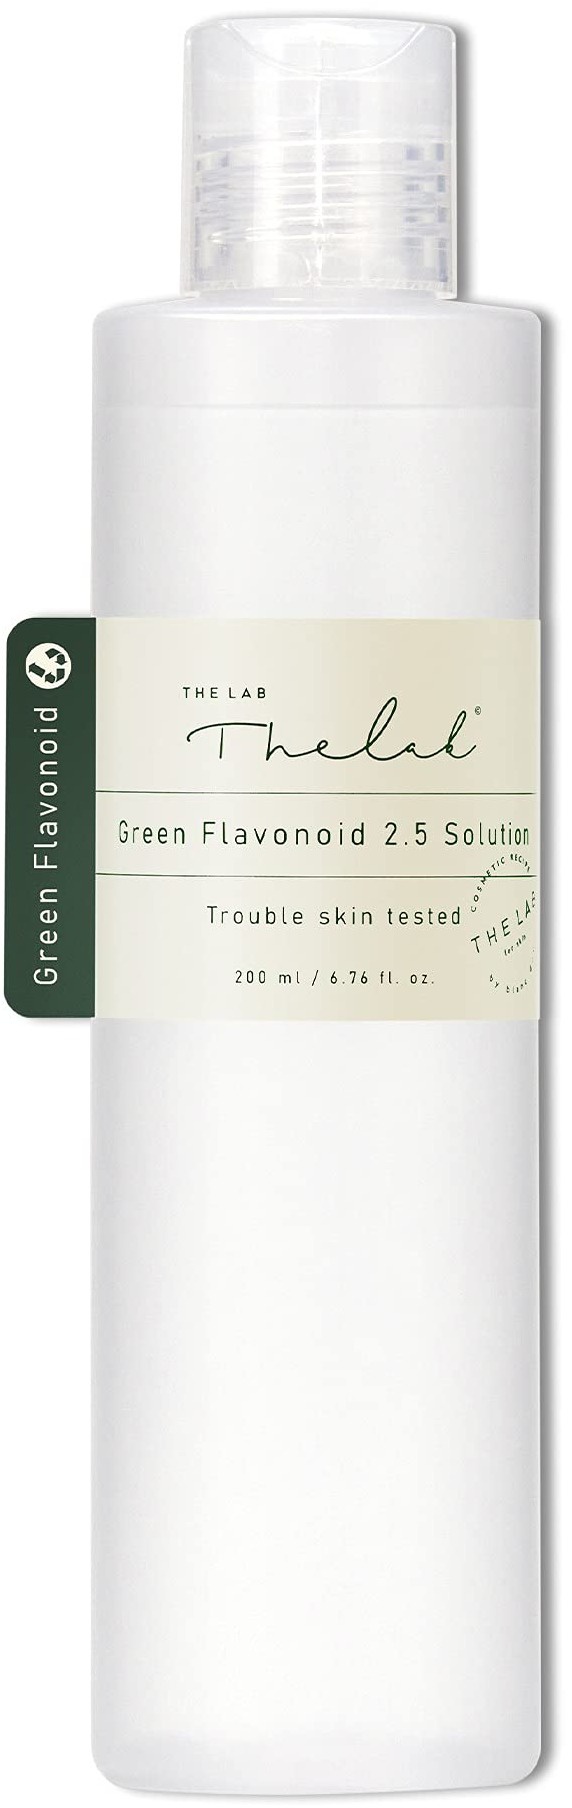 THE LAB by blanc doux Green Flavonoid 2.5 Solution